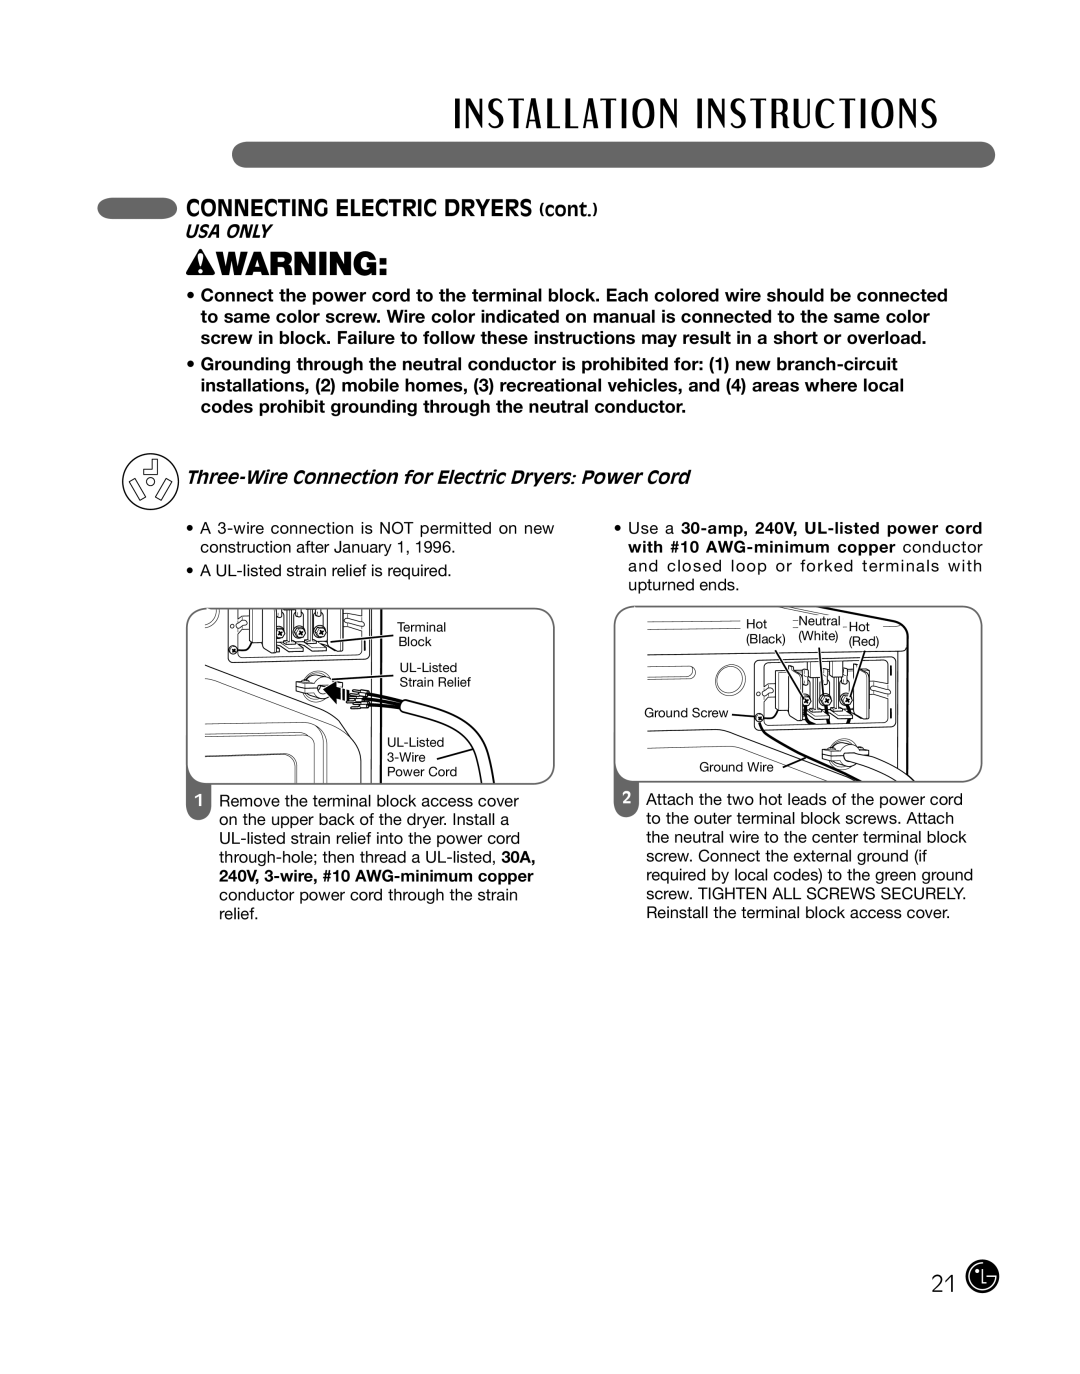 LG Electronics P154 manual Three-Wire Connection for Electric Dryers Power Cord, wWARNING, CONNECTING ELECTRIC DRYERS cont 